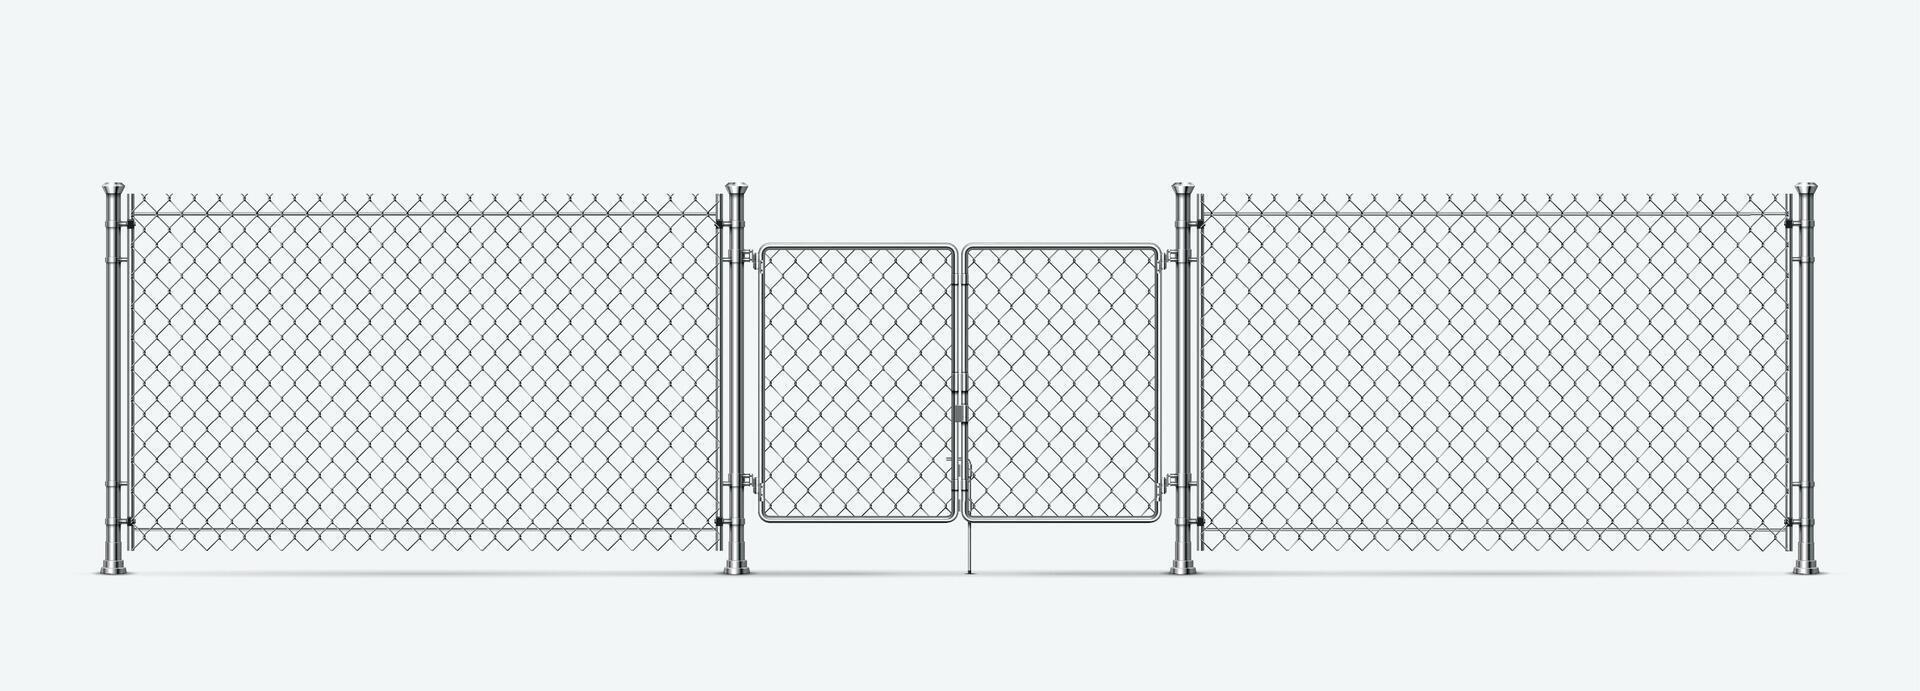 Realistic steel wire fence with gates and metal columns. Barrier chain link mesh with door. 3d prison or military wire border vector element